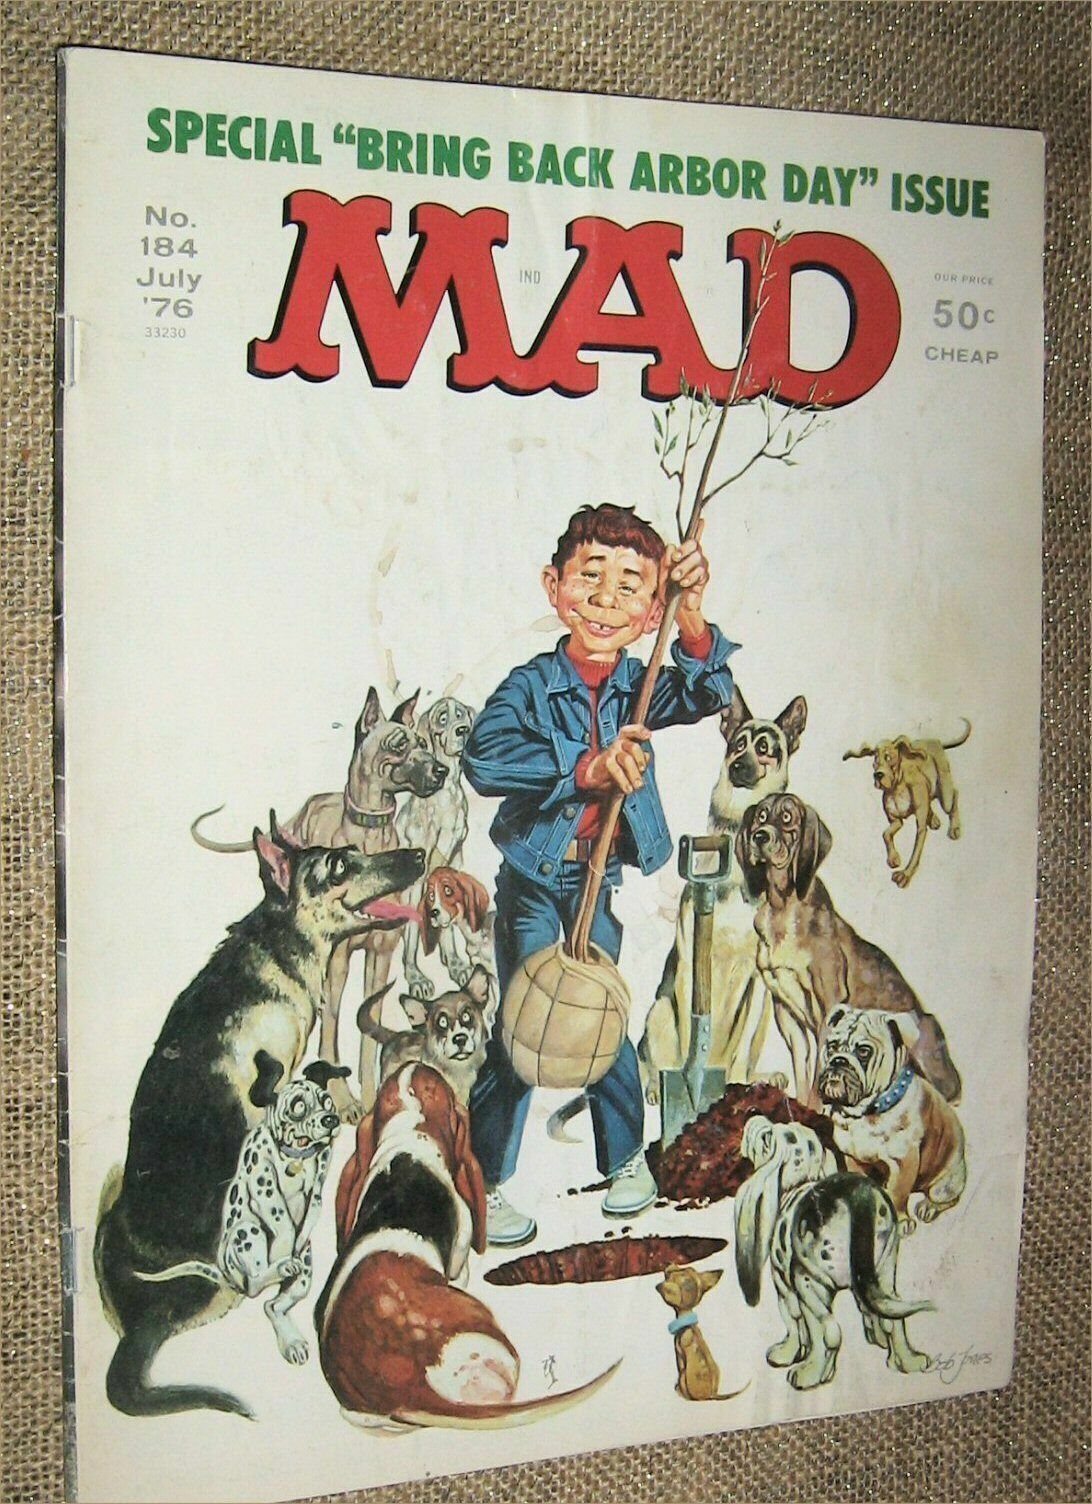 Vintage Mad Magazine July 1976 No. 184,Iconic Humor,Arbor Day,RARE Double Cover